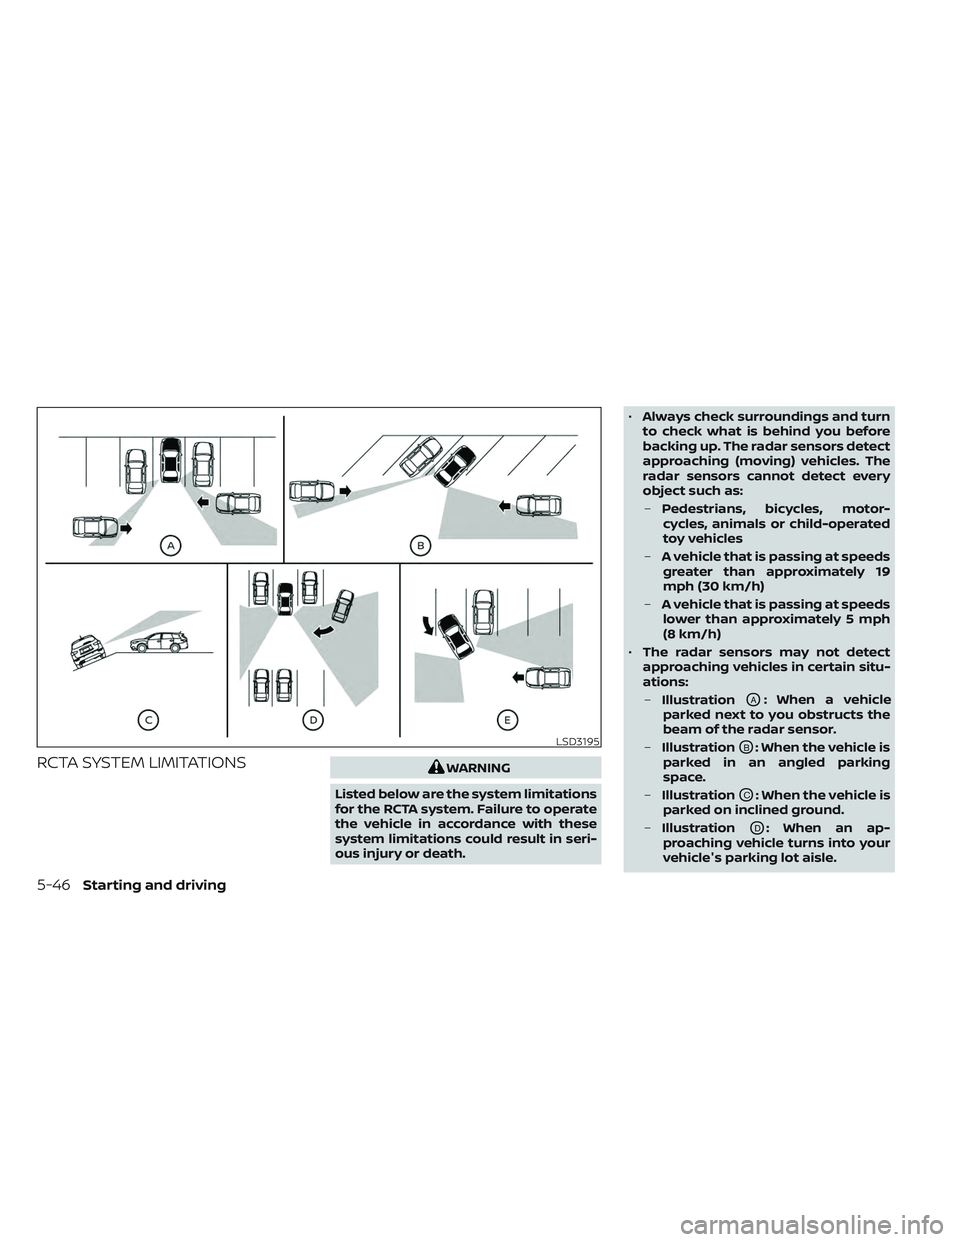 NISSAN FRONTIER 2023  Owners Manual RCTA SYSTEM LIMITATIONSWARNING
Listed below are the system limitations
for the RCTA system. Failure to operate
the vehicle in accordance with these
system limitations could result in seri-
ous injury 